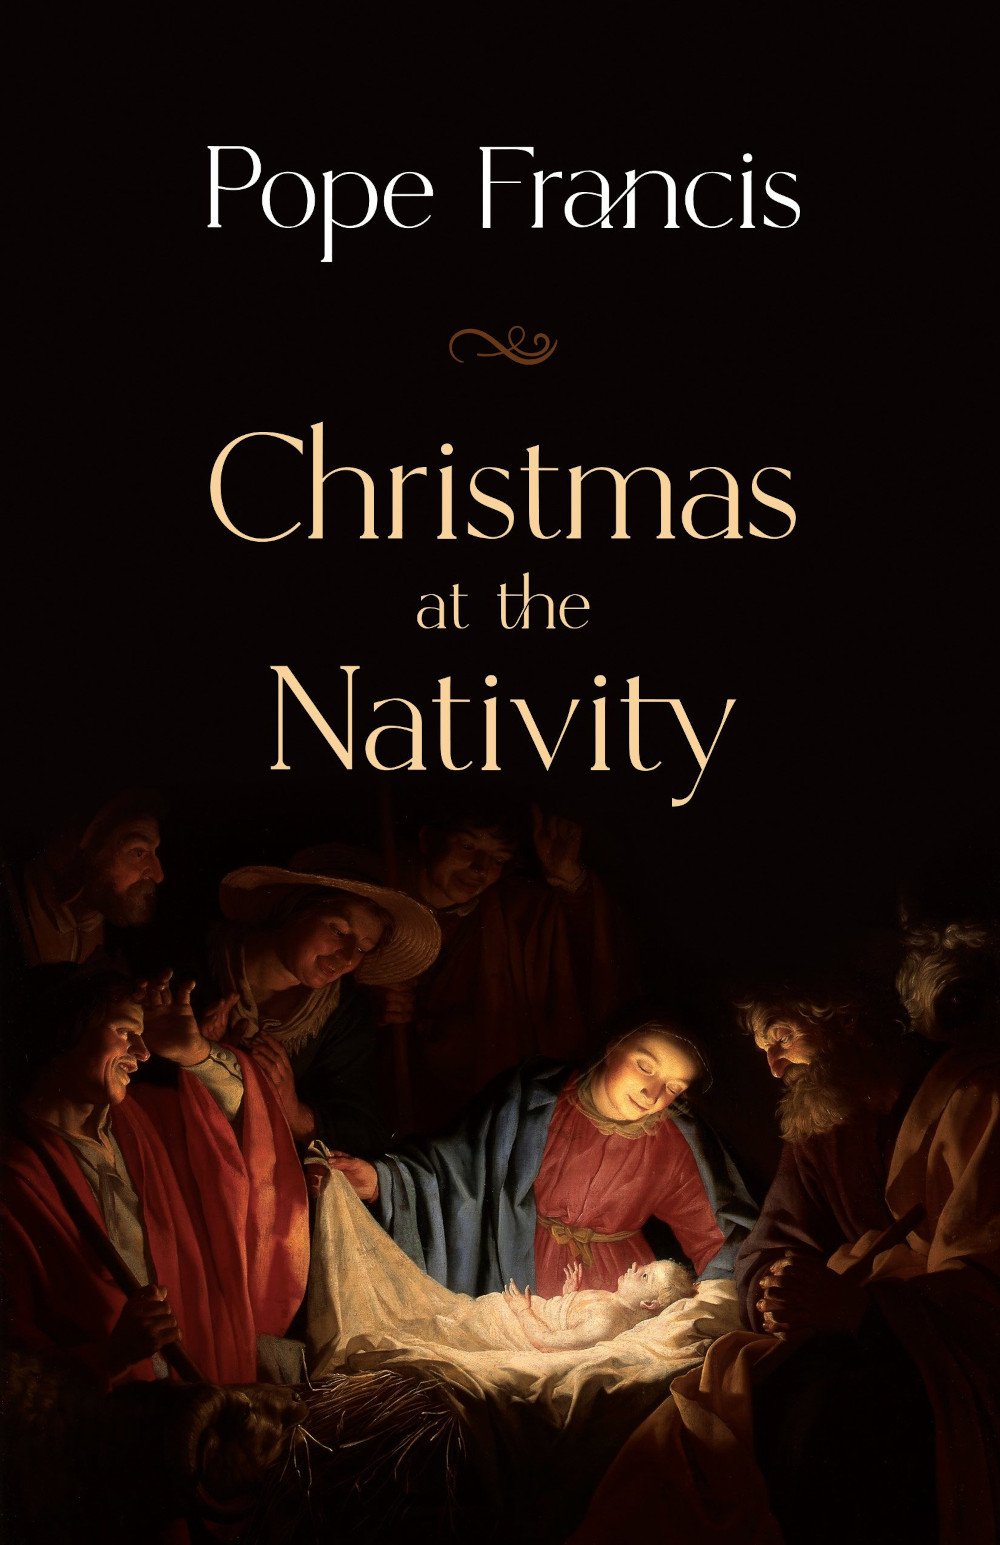 A book cover with a nativity scene says "Pope Francis: Christmas at the Nativity"